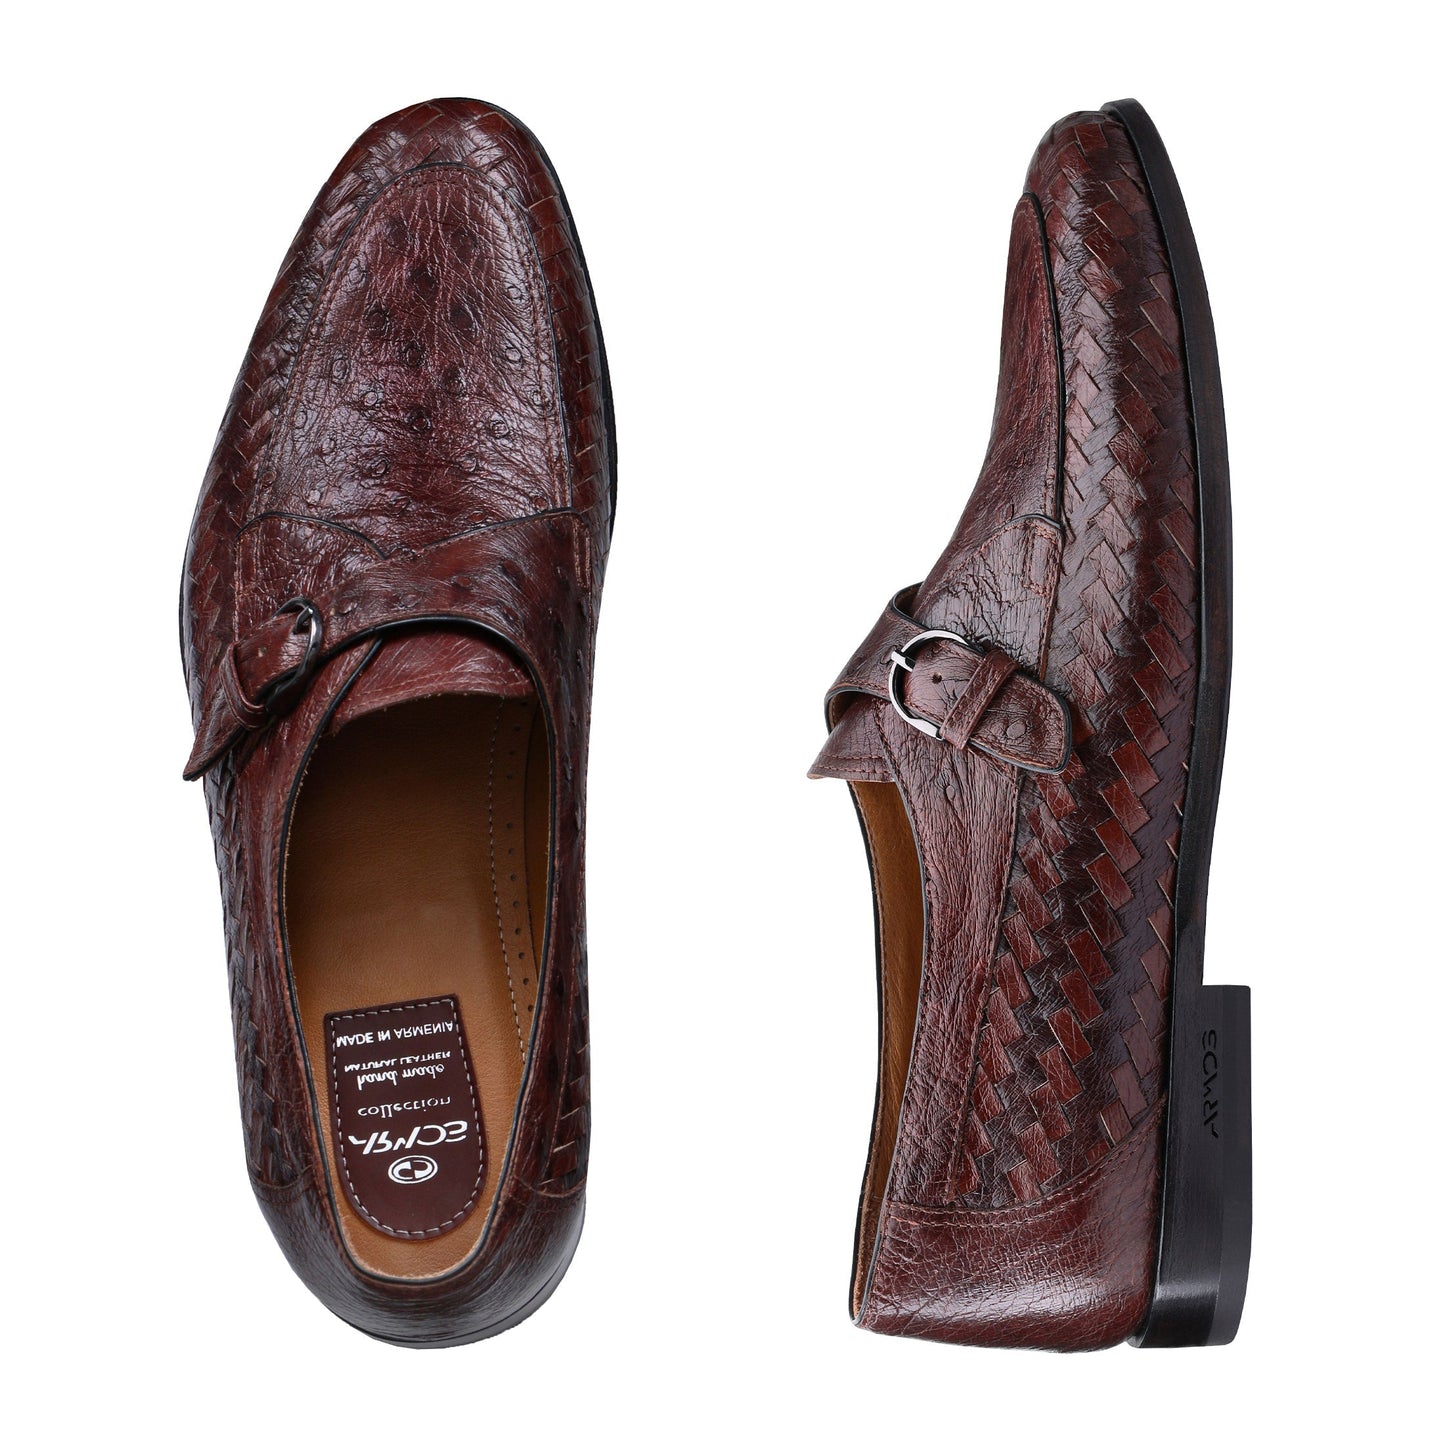 Ostrich leather shoes